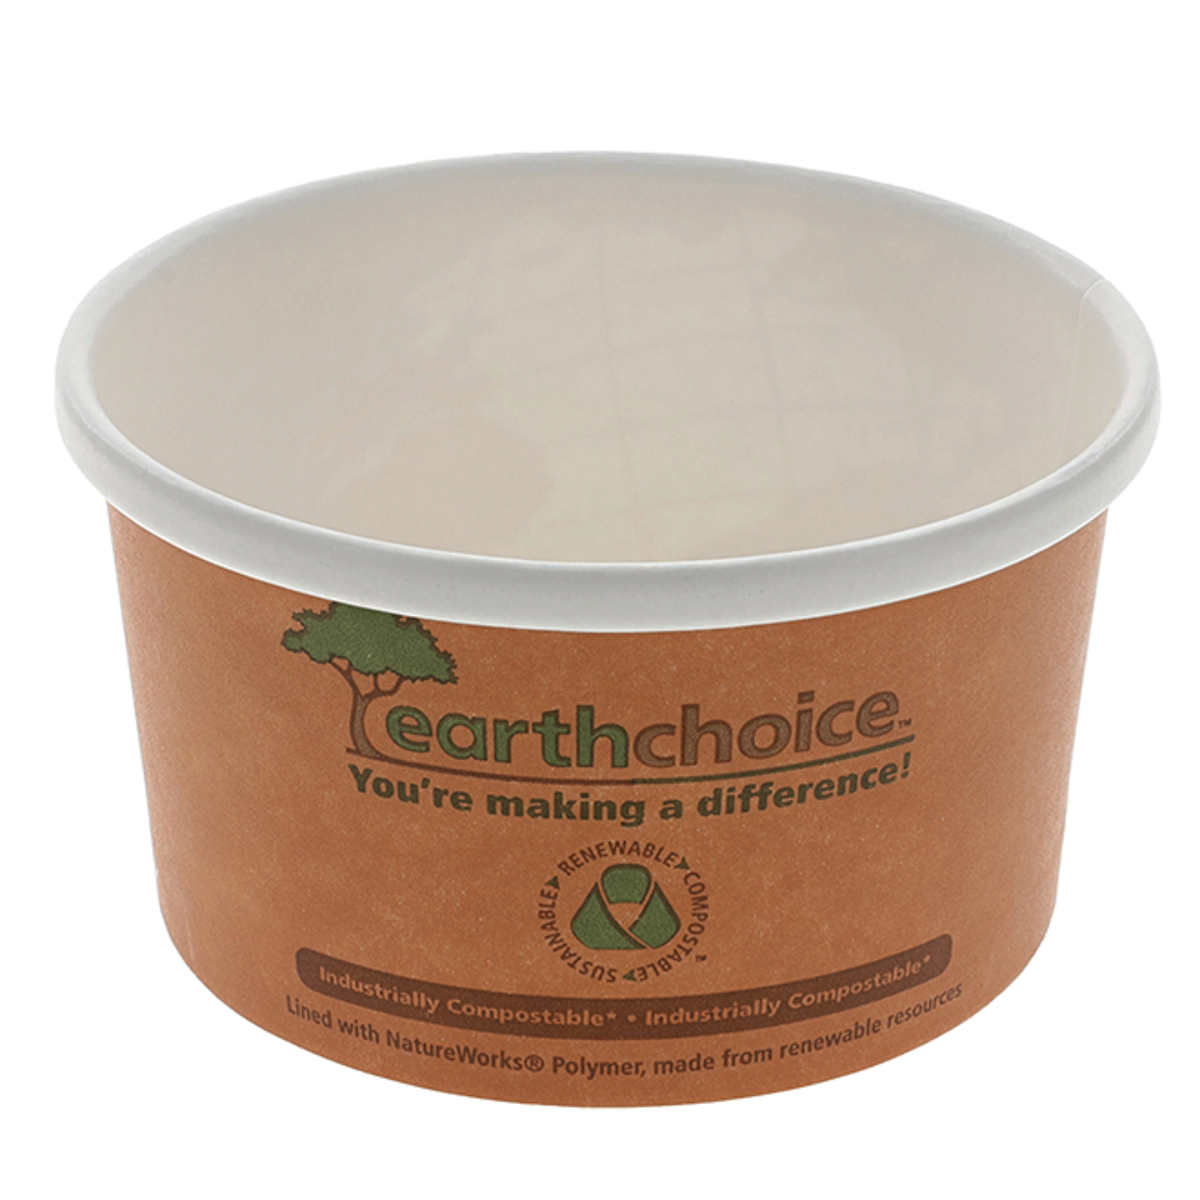 Better Earth Hot & Cold Food Container - 8 oz.